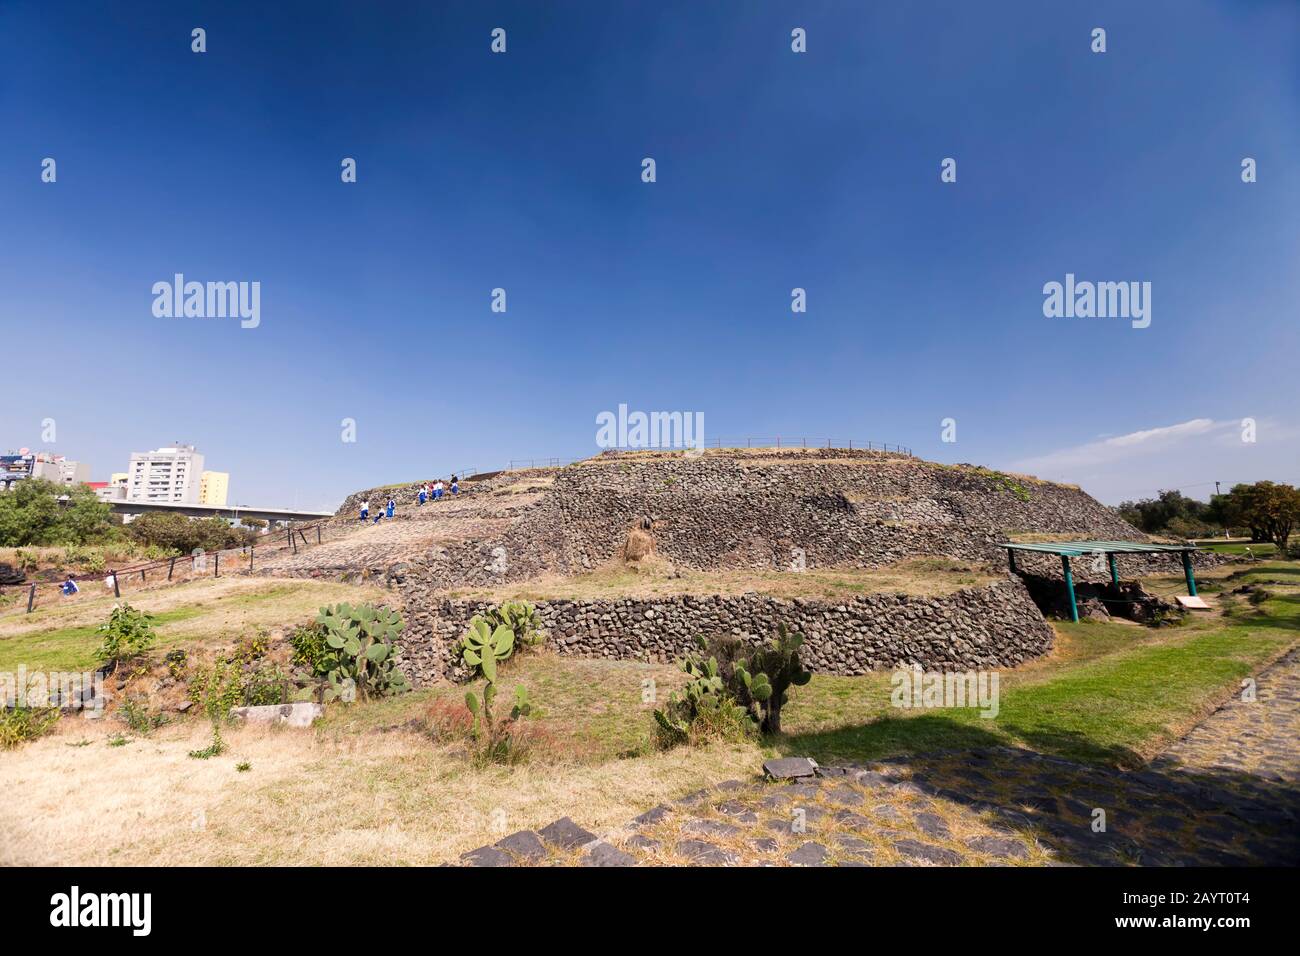 Cuicuilco, archaeological site of Mesoamerican Middle and Late Formative periods, suburb of Mexico City, Mexico, Central America Stock Photo